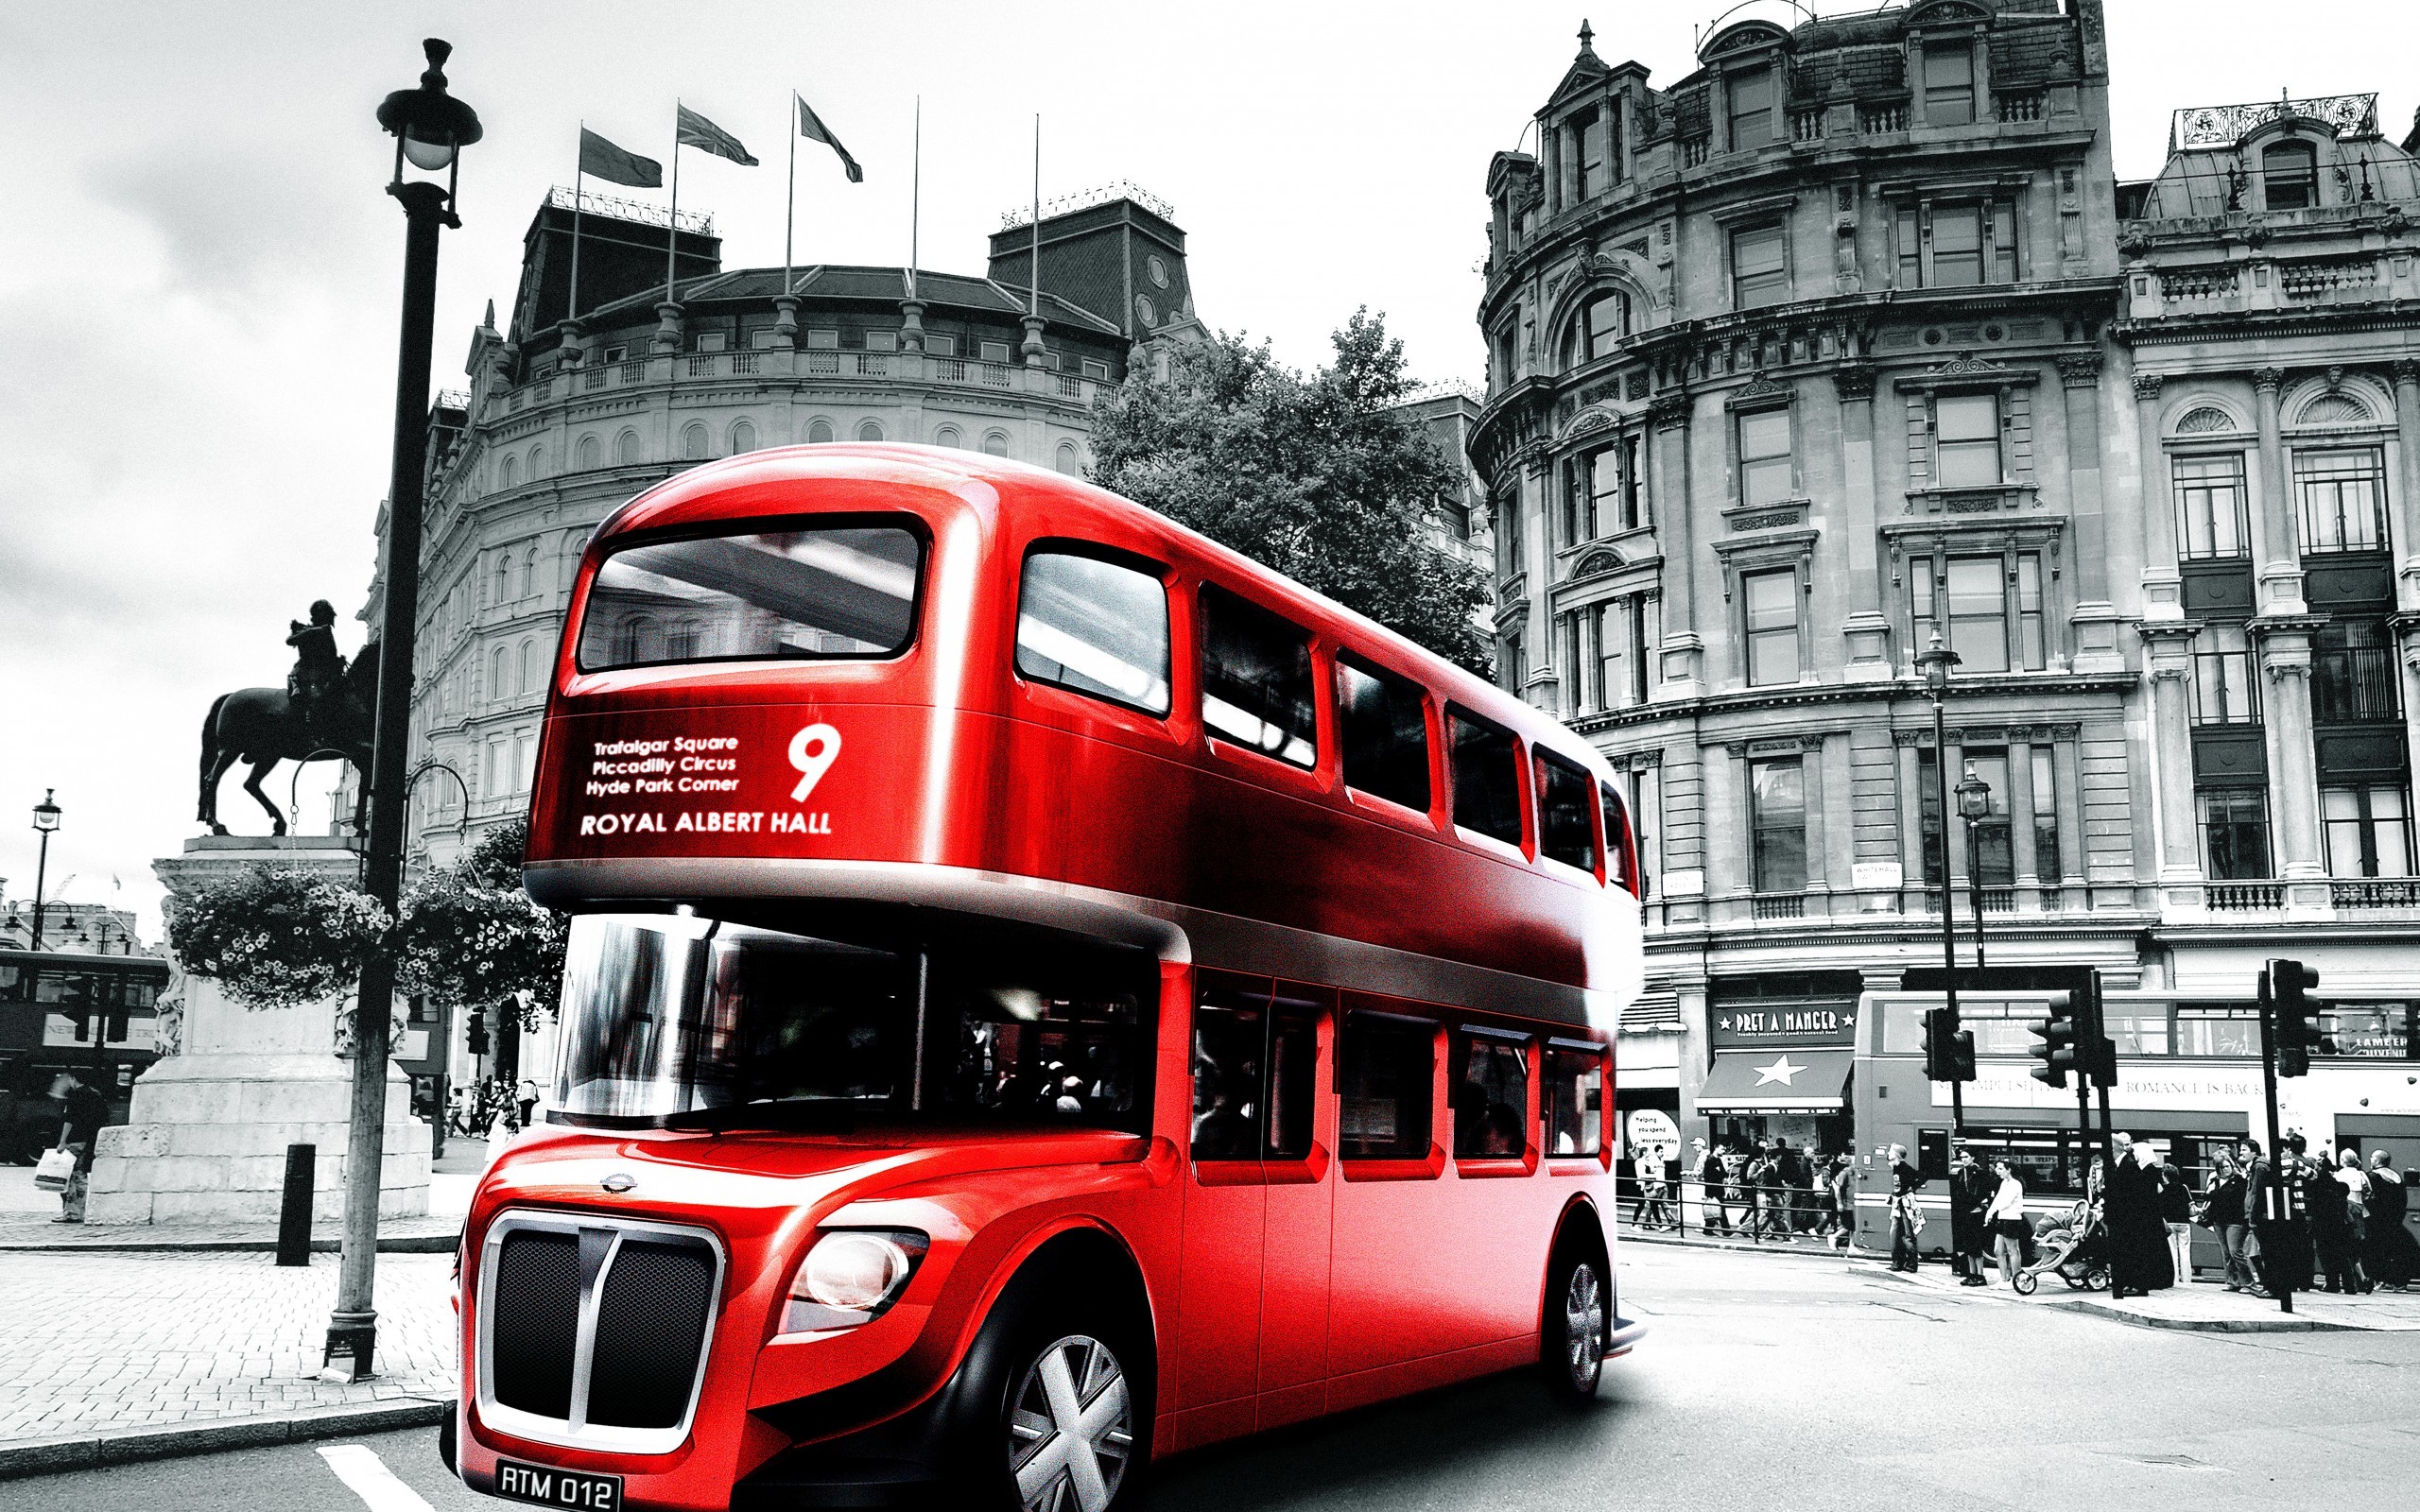 2560x1600 Download wallpaper london, england, bus, black and white, city .